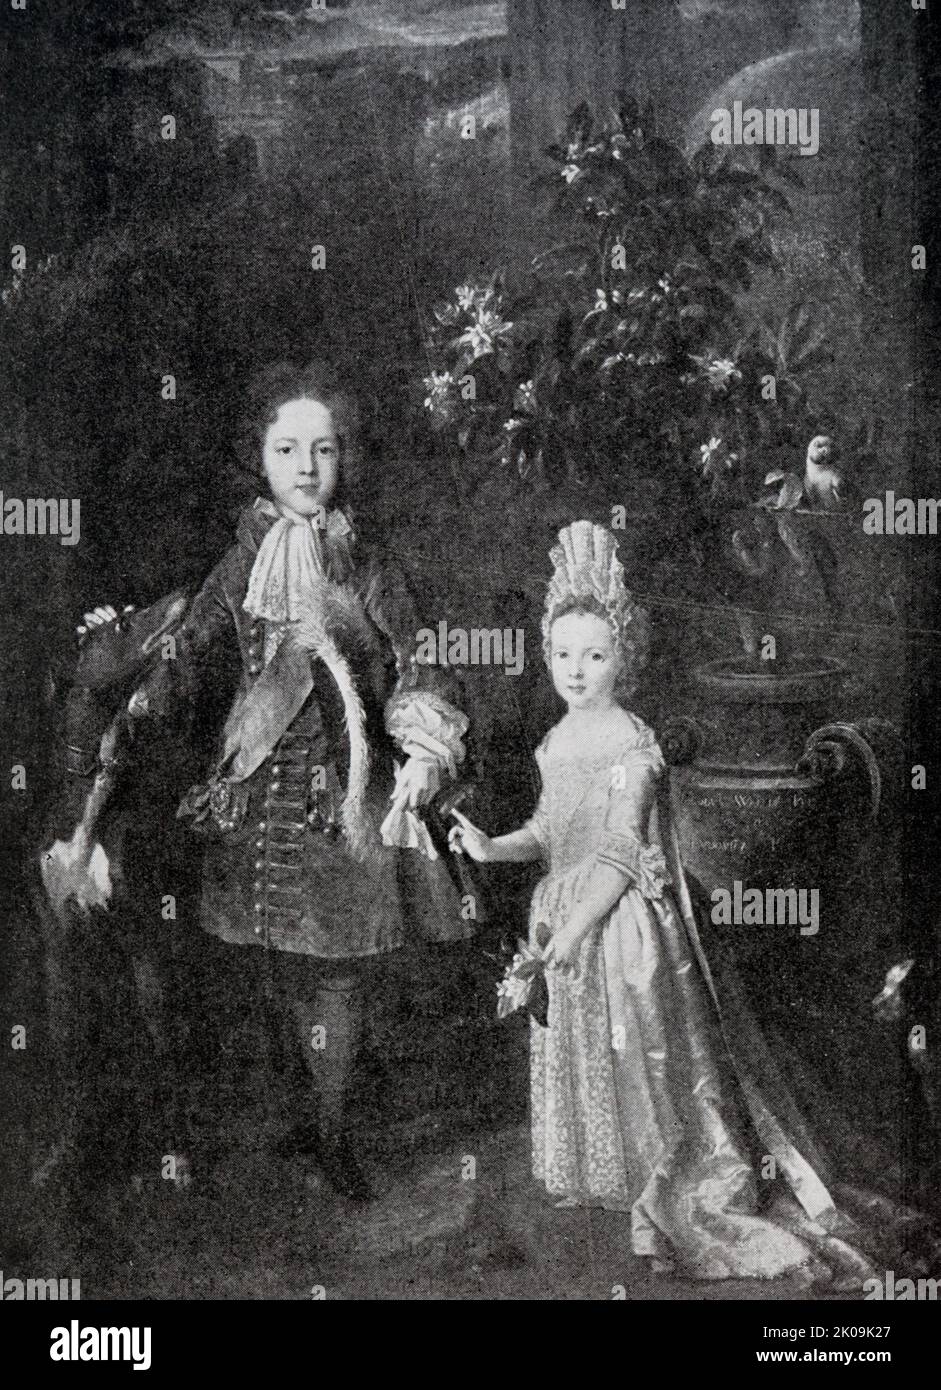 Children of James II. Mary II (30 April 1662 - 28 December 1694) was Queen of England, Scotland, and Ireland, co-reigning with her husband, William III & II, from 1689 until her death in 1694. Anne (6 February 1665 - 1 August 1714) was Queen of England, Scotland and Ireland between 8 March 1702 and 1 May 1707. She continued to reign as Queen of Great Britain and Ireland until her death in 1714. Stock Photo